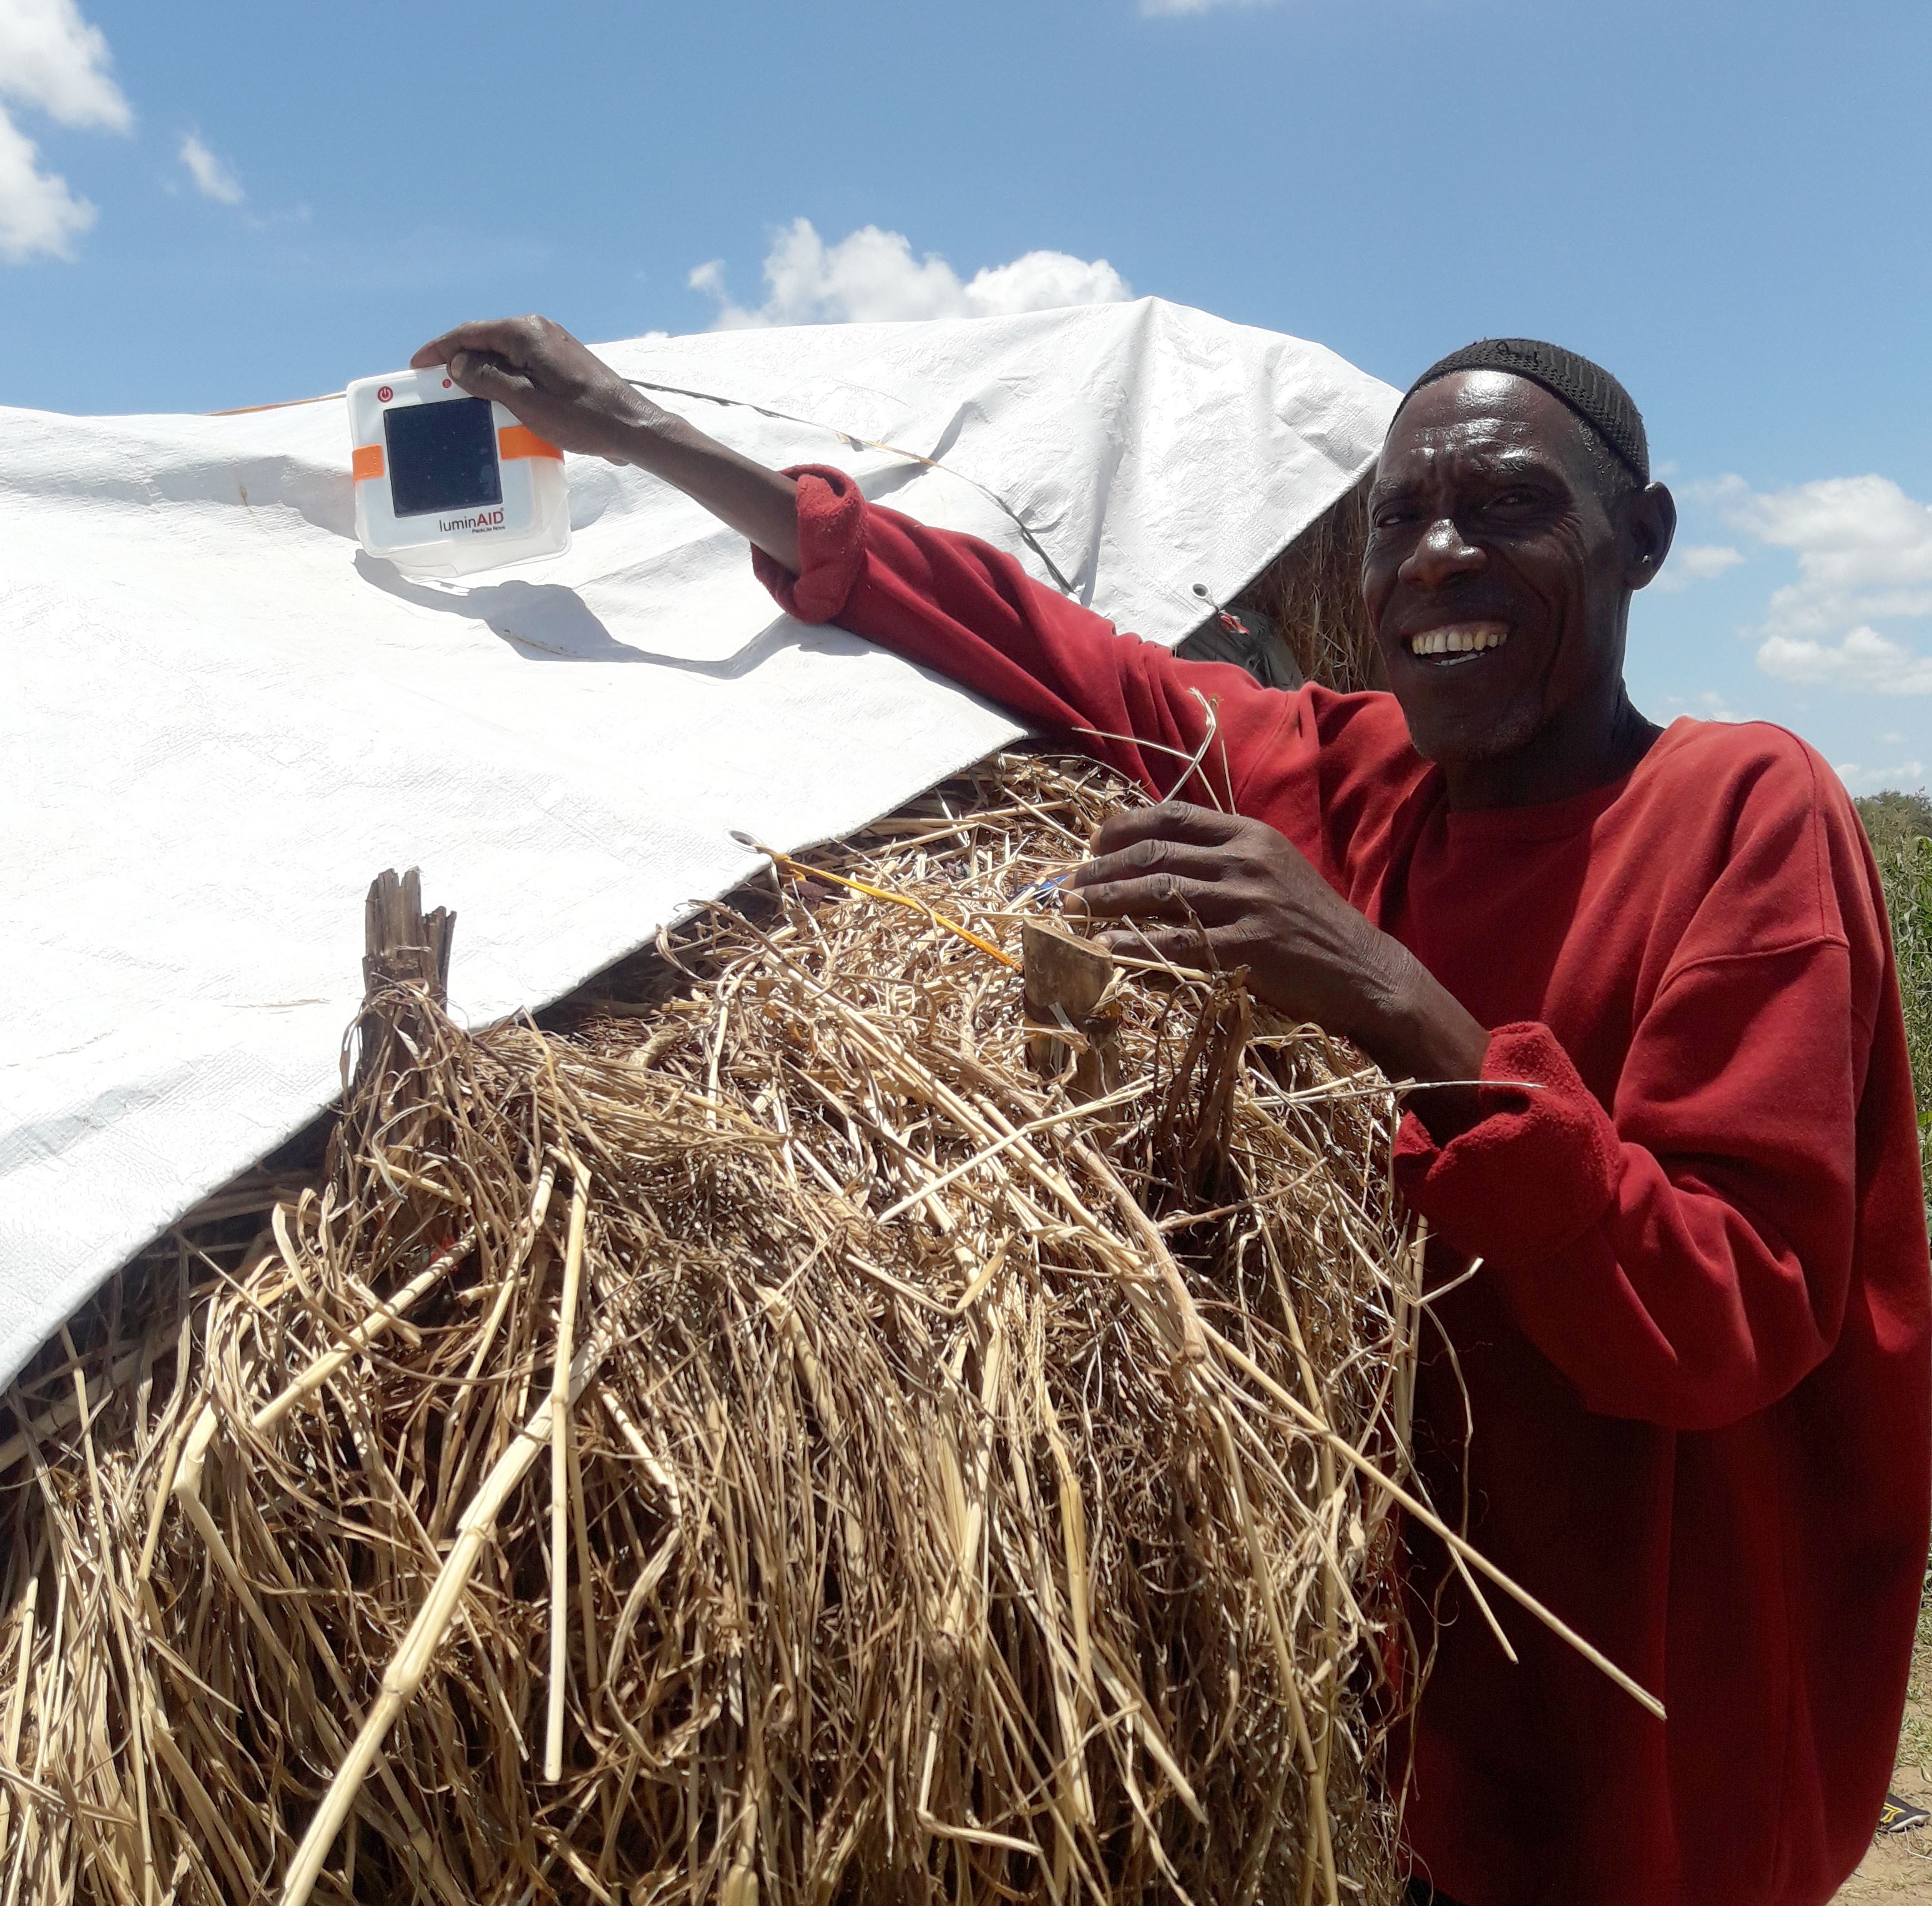 Cattle farmer cheerfully charging his Luminaid light during the day